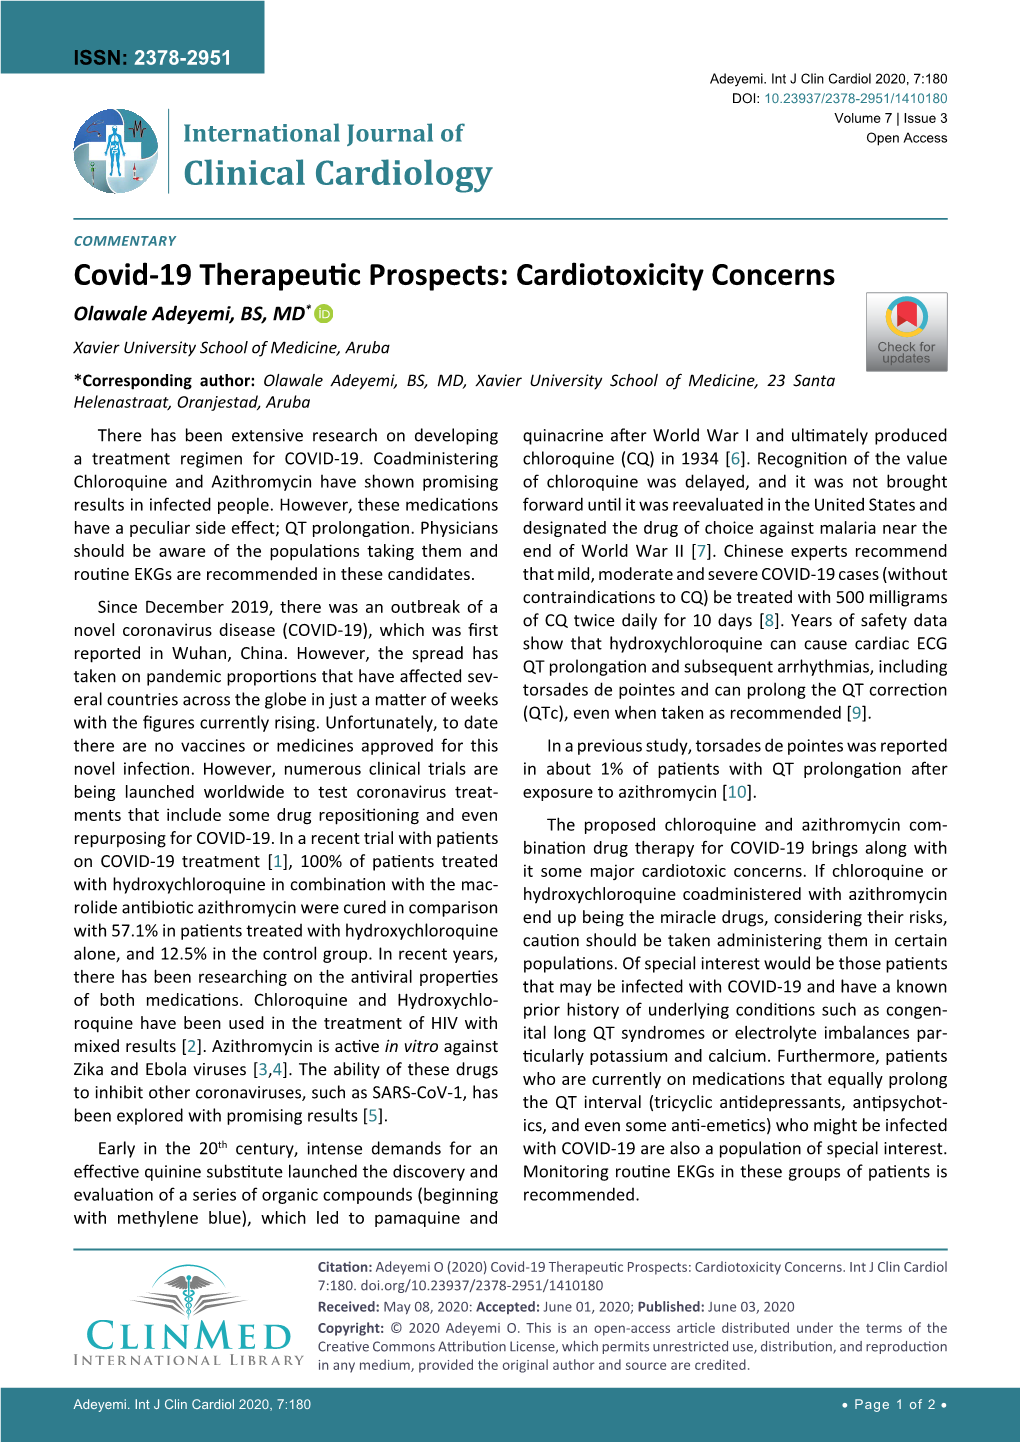 Covid-19 Therapeutic Prospects: Cardiotoxicity Concerns Olawale Adeyemi, BS, MD*